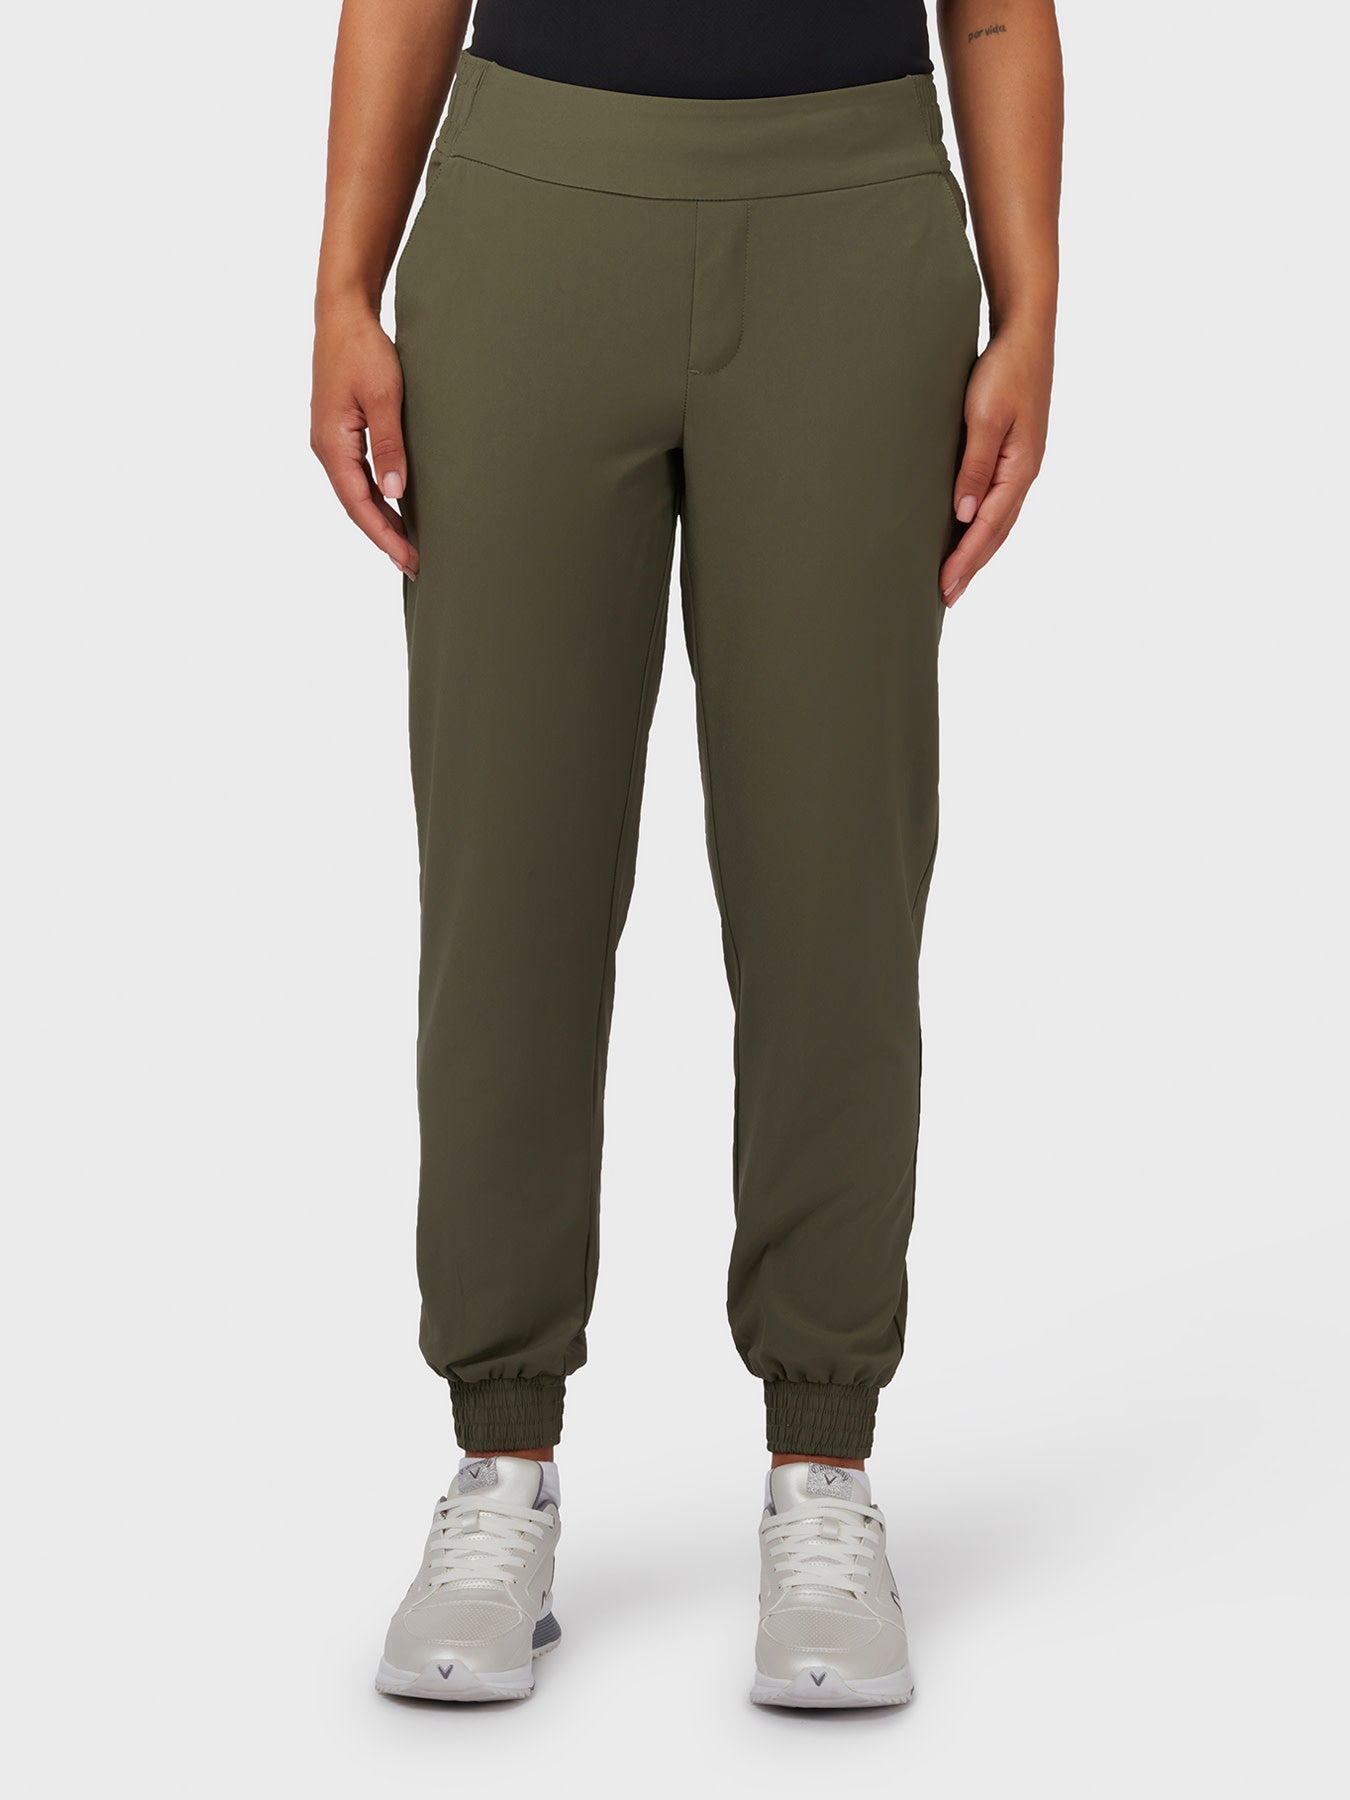 View Lightweight Womens Joggers In Industrial Green Industrial Green XS information